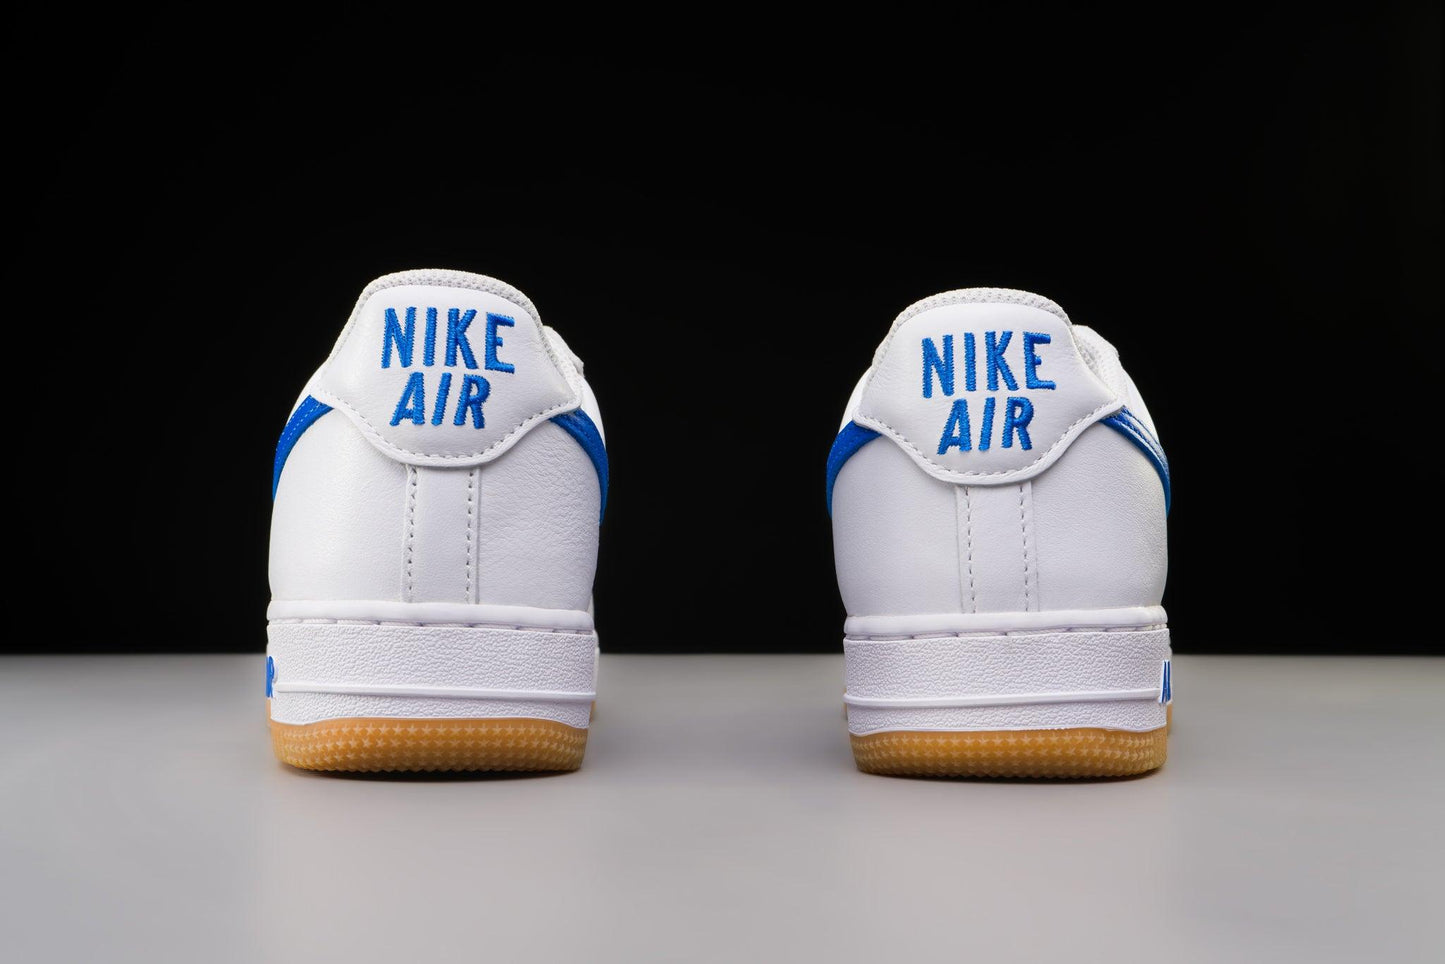 Nike Air Force 1 '07 Low Color of the Month Varsity Royal Gum - Lo10M